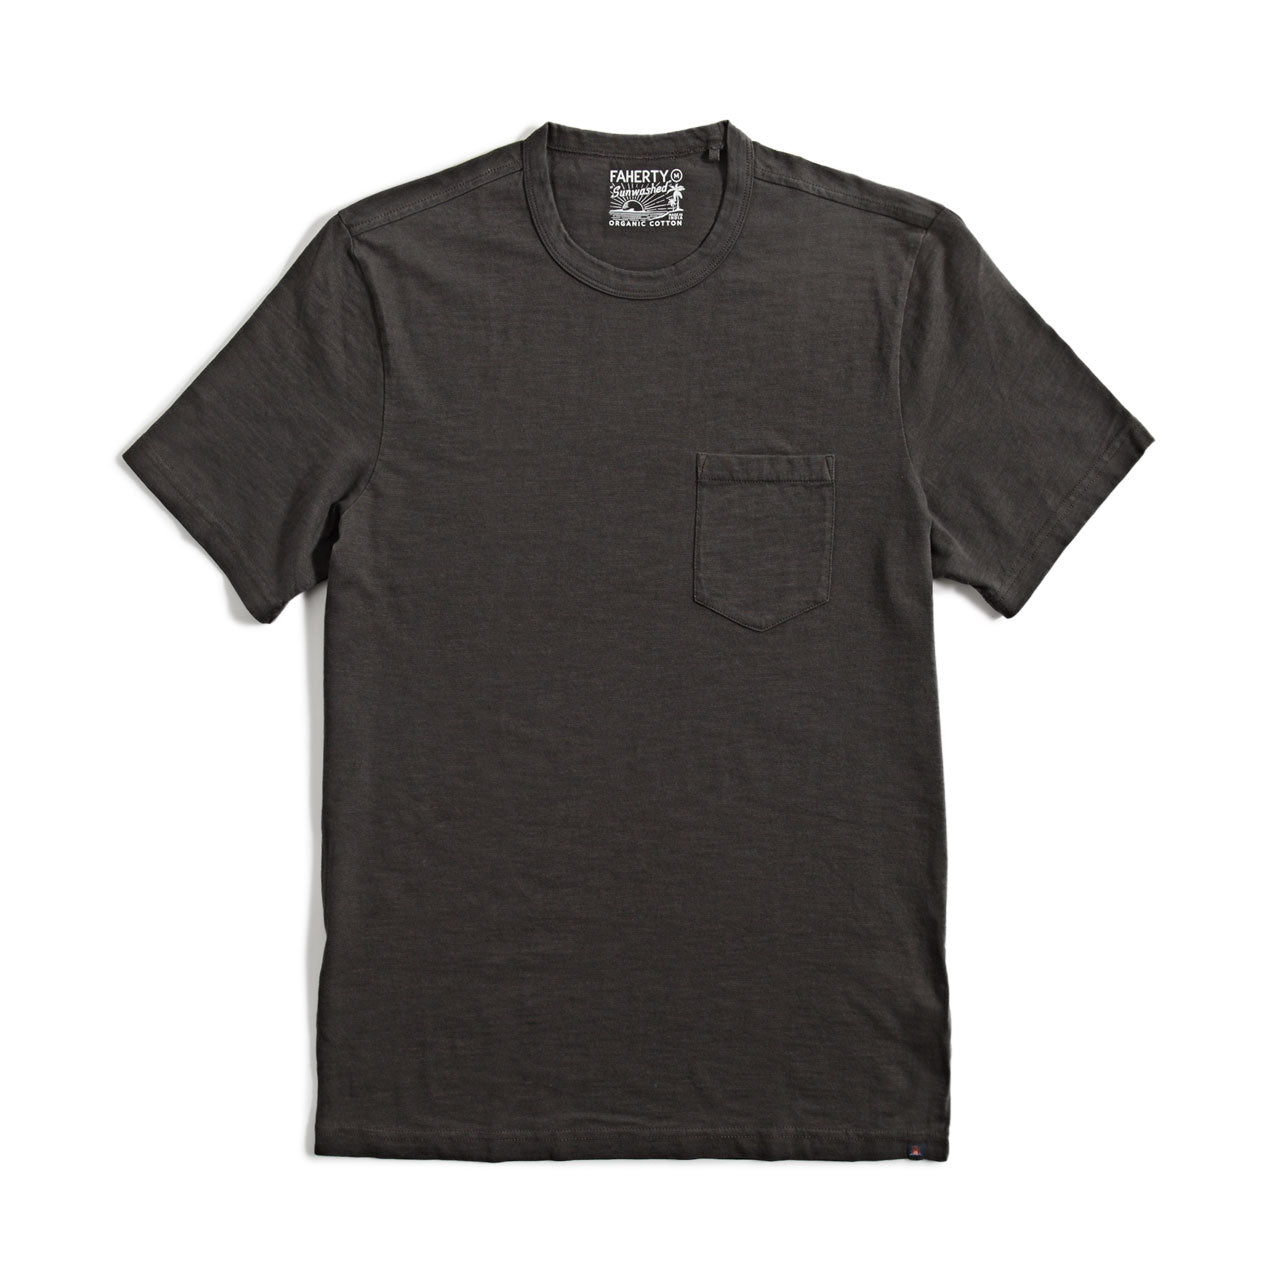 Faherty Sunwashed Pocket Tee | Uncrate